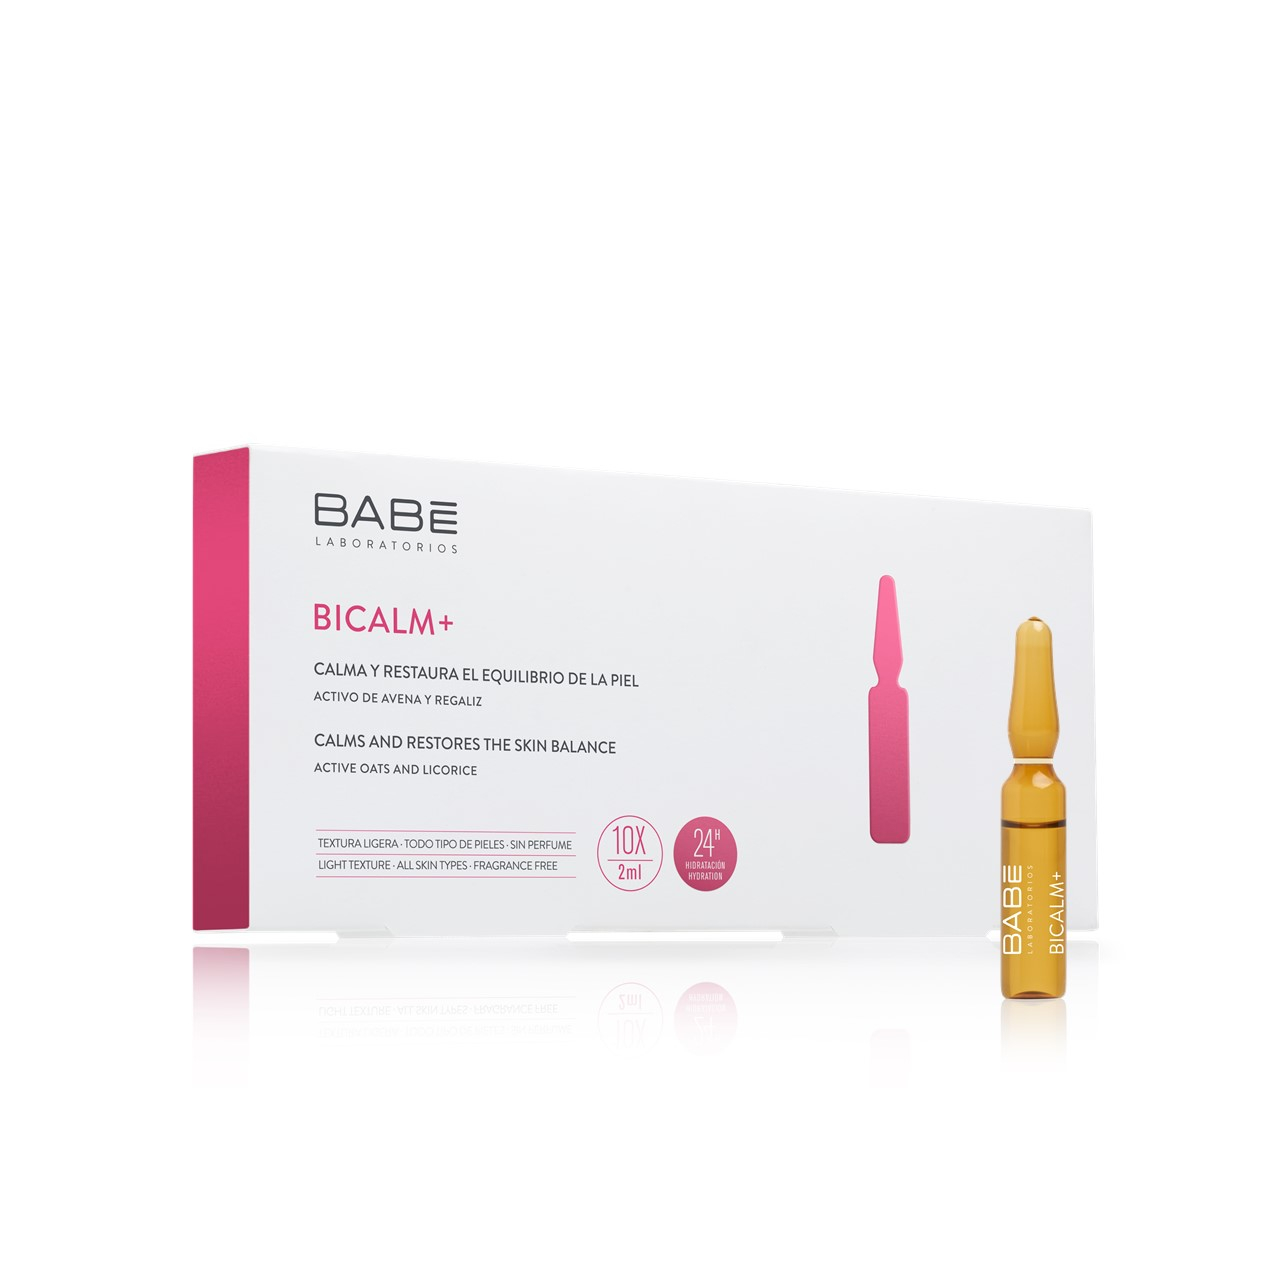 Babé Bicalm+ Soothing & Repairing Ampoules x10